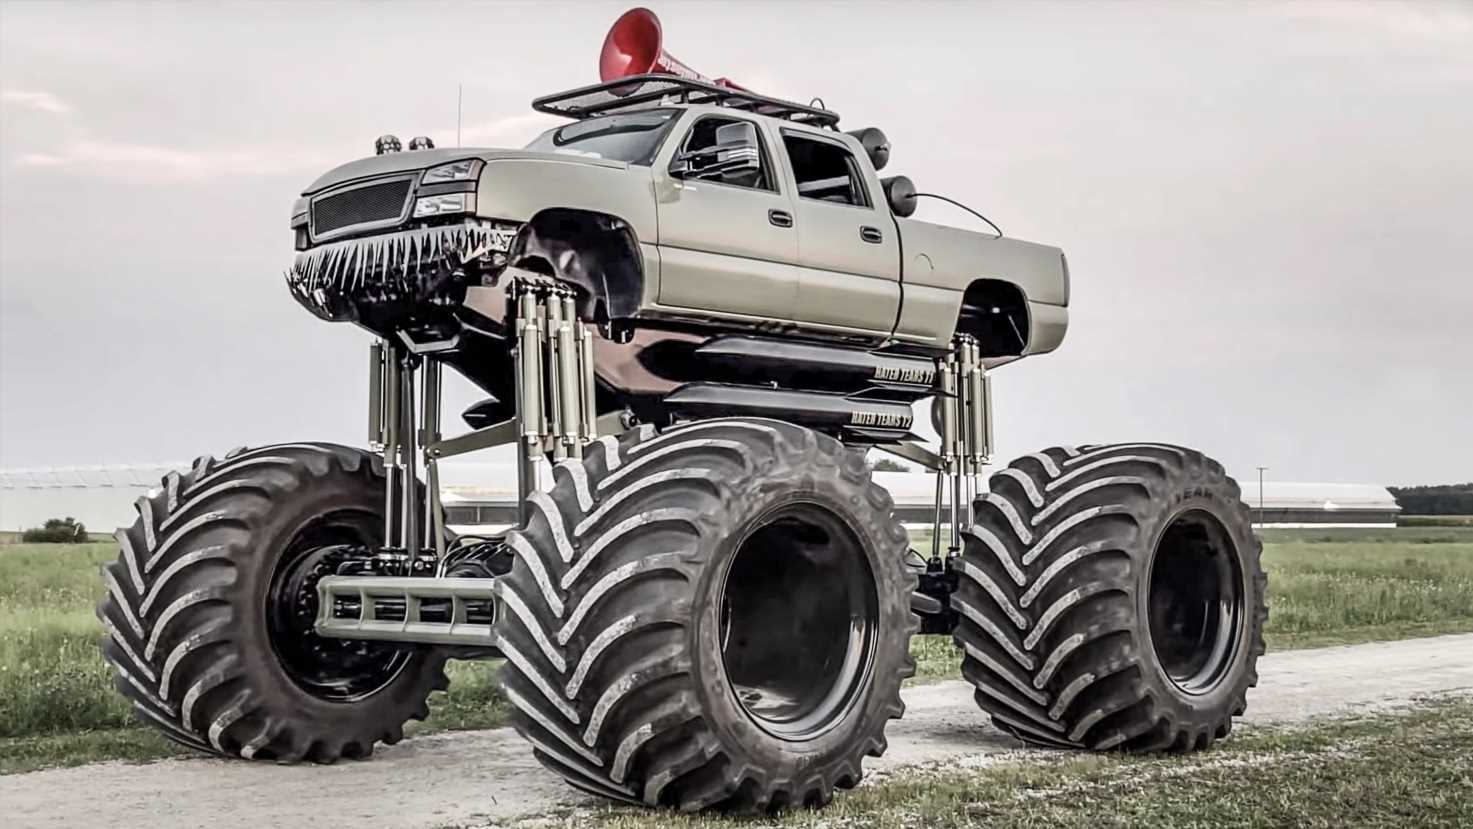 Monstermax 2: Is This The World's Biggest Twin Diesel Monster Truck?